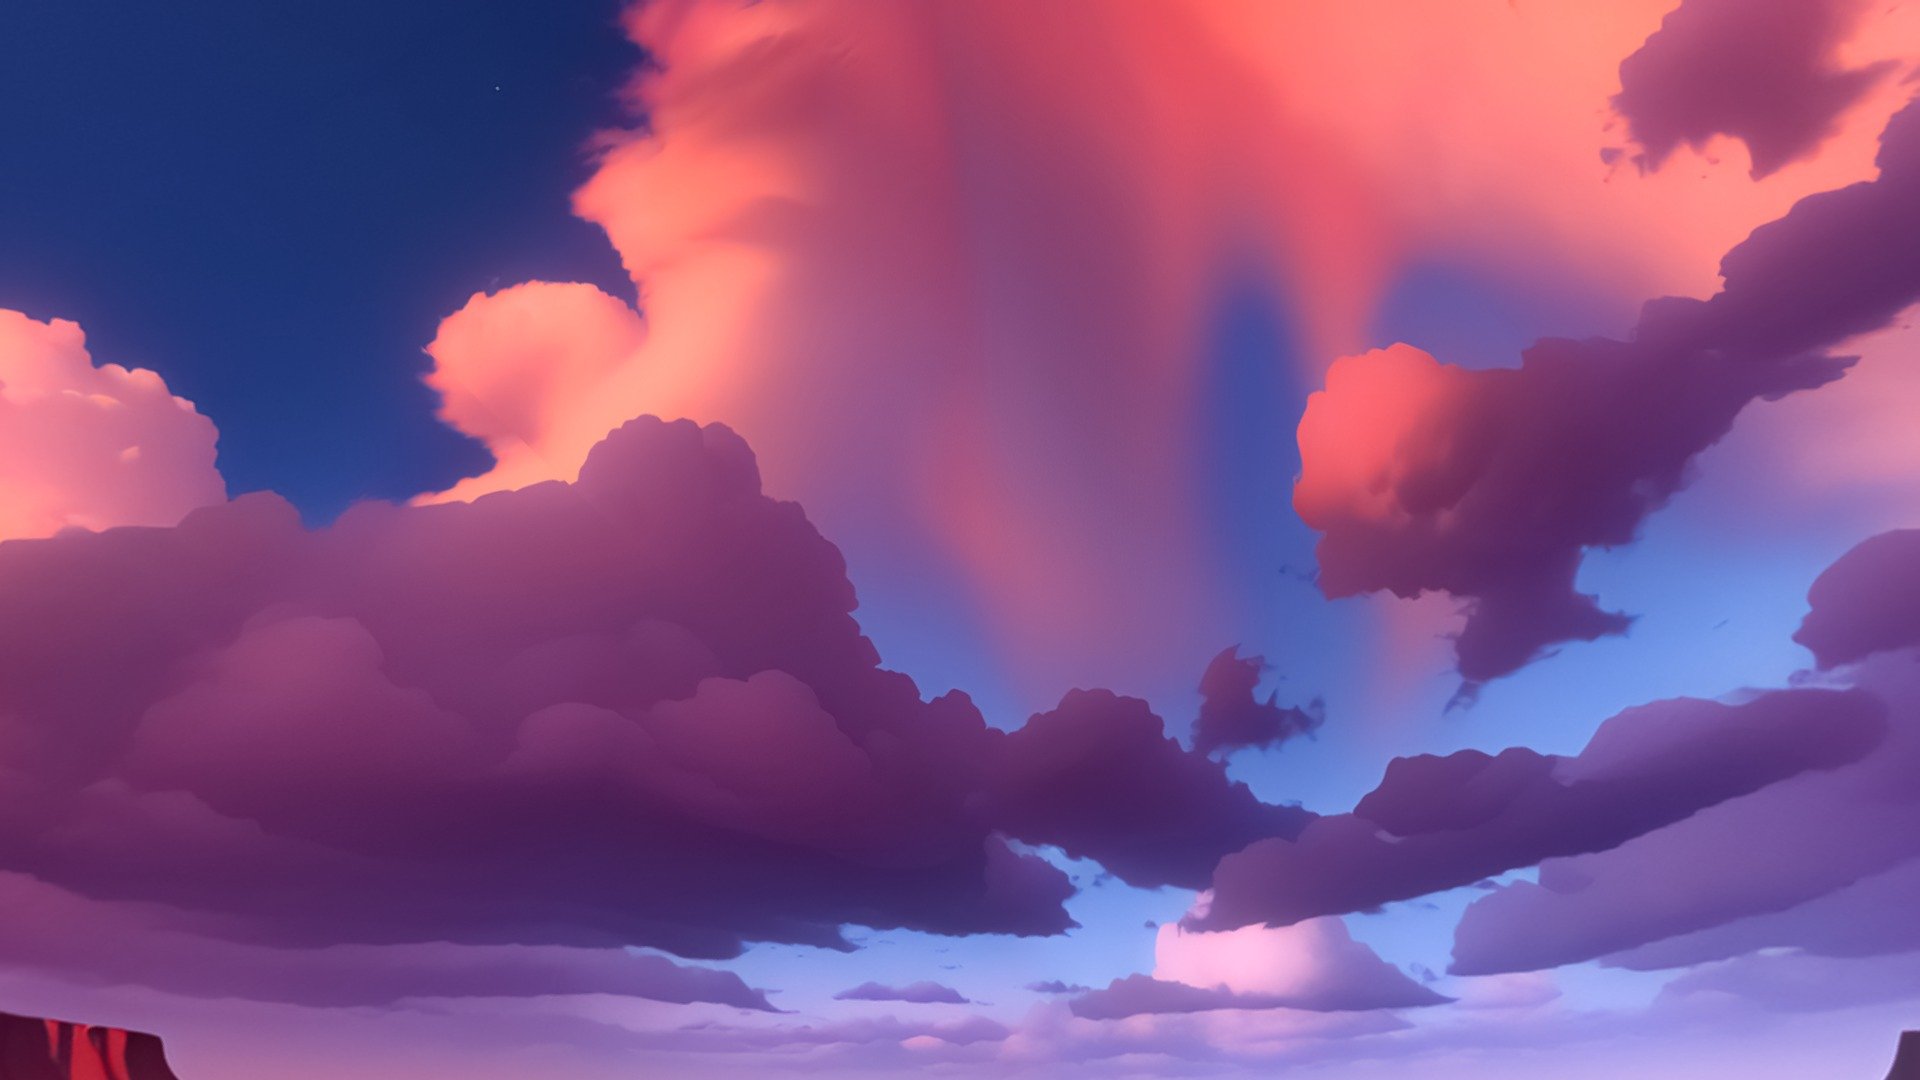 Beautiful stylized dreamy skybox. Perfect for beautiful, stylized environments and your rendering scene.

The package contains one panorama texture and one cubemap texture (png)

panorama texture: 8192 x 4096 

cubemap texture: 6144 x 4608 

Because of this size it is easier to customize more and better details if you want that. 

The sizes can be changed in your graphics program as desired

( textures are under Other available downloads)

used: AI, Photoshop

*-------------Terms of Use--------------

Commercial use of the assets provided is permitted but cannot be included in an asset pack or sold at any sort of asset/resource marketplace or be shared for free* - Stylized Cloudy Sky Sunset - Buy Royalty Free 3D model by stylized skybox (@skybox_) 3d model